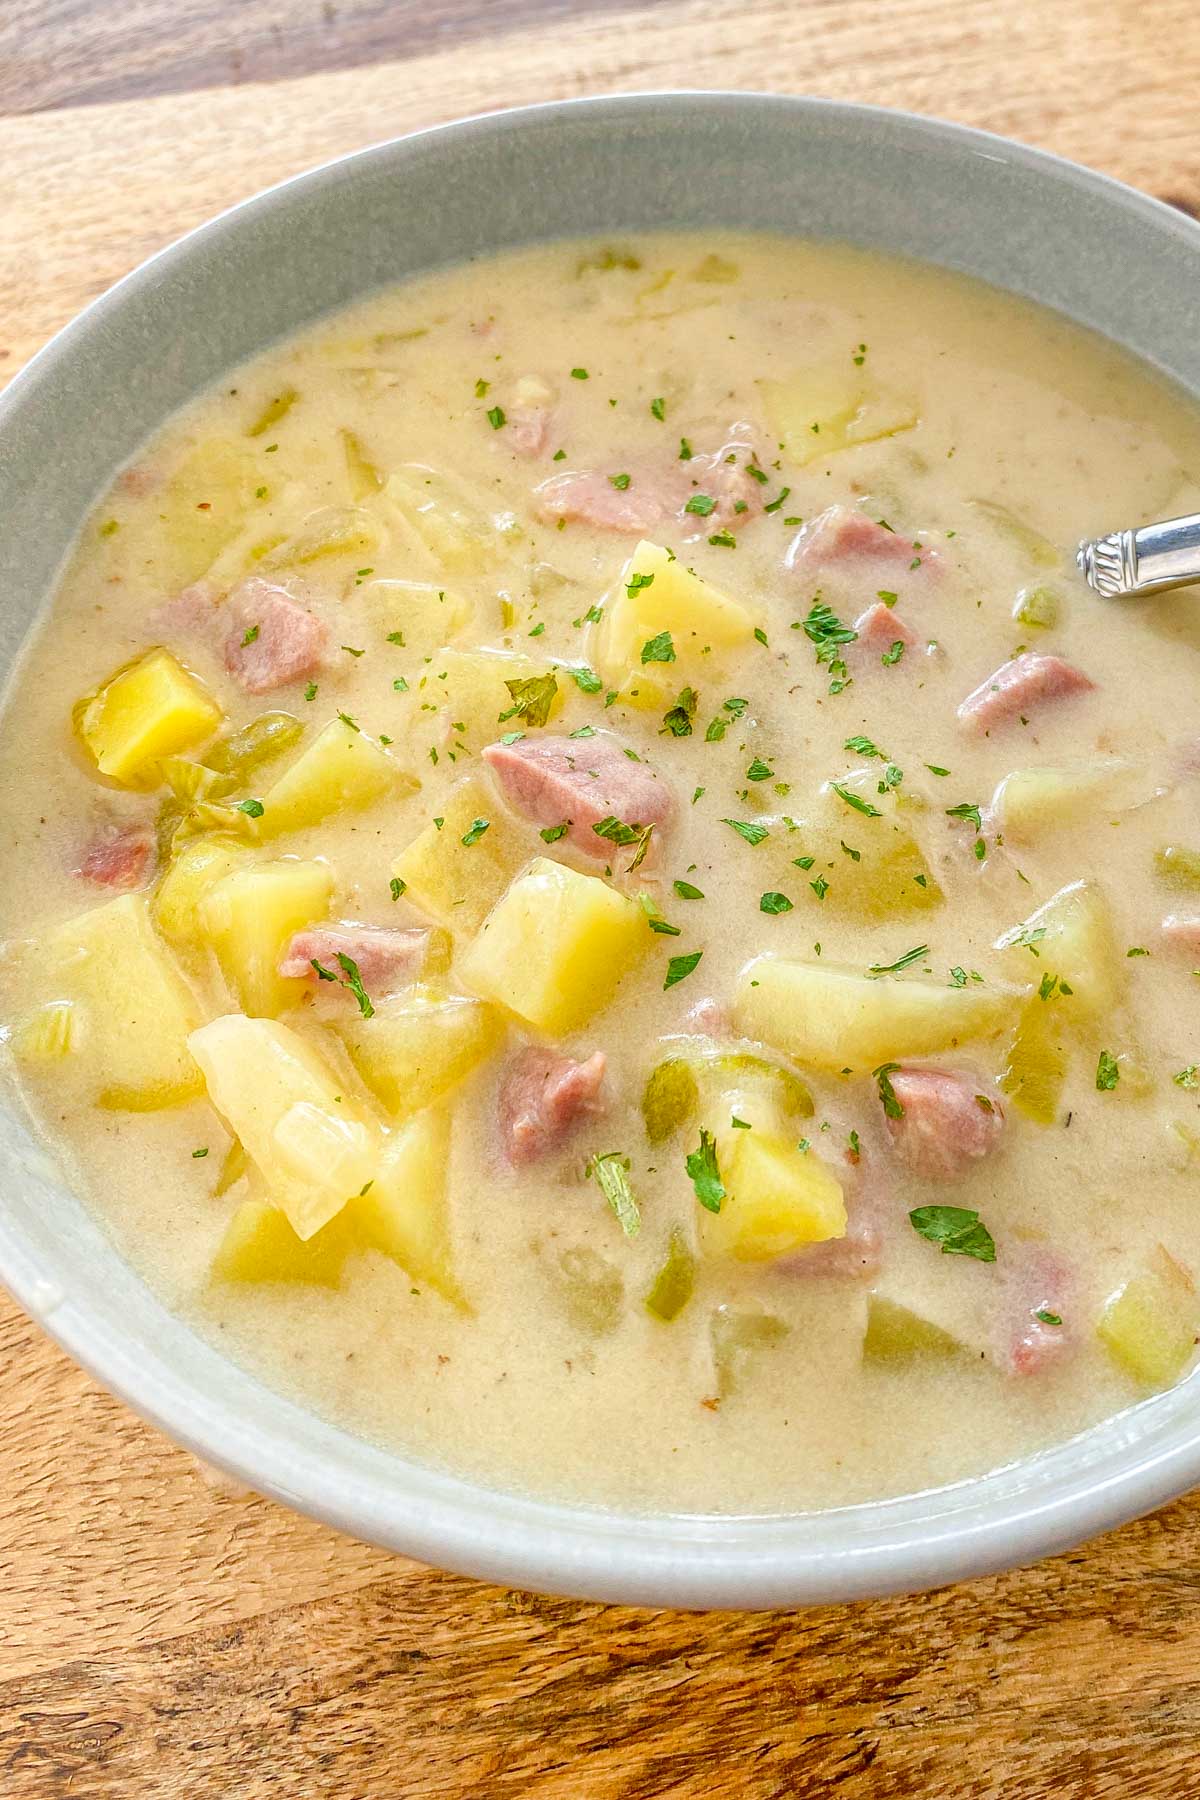 Creamy soup made with ham and potatoes in a blue bowl.